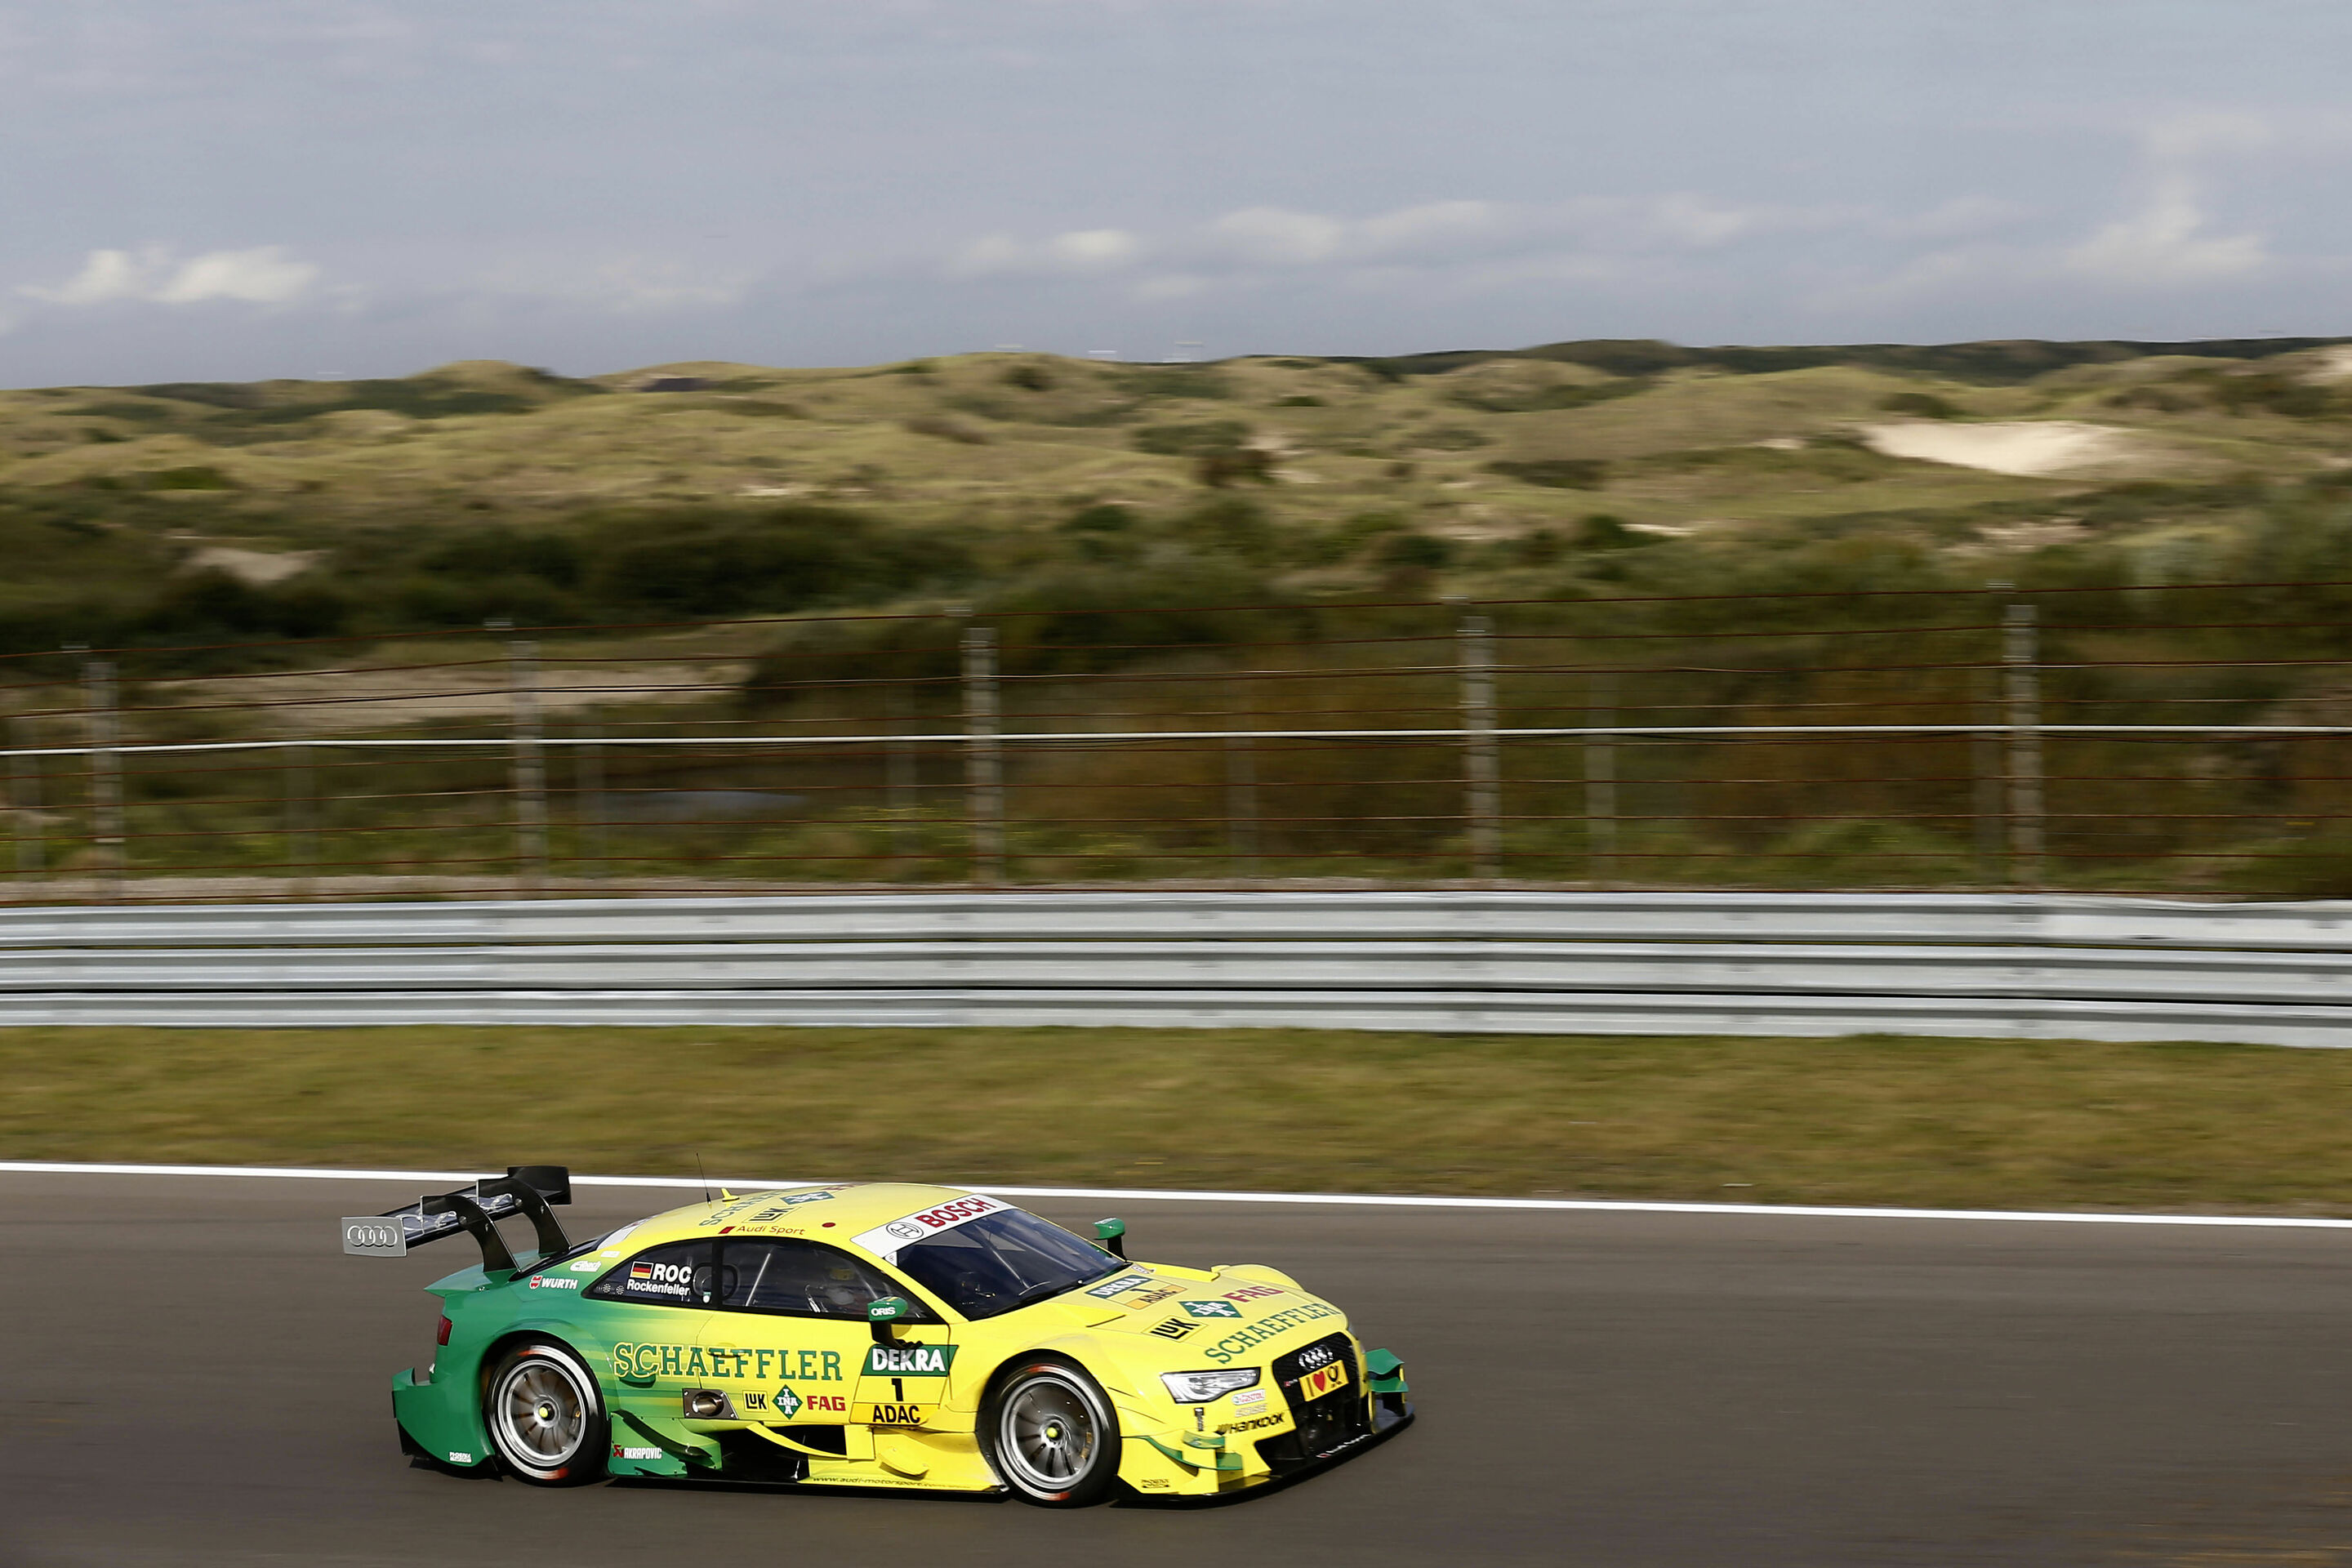 Quotes after qualifying at Zandvoort